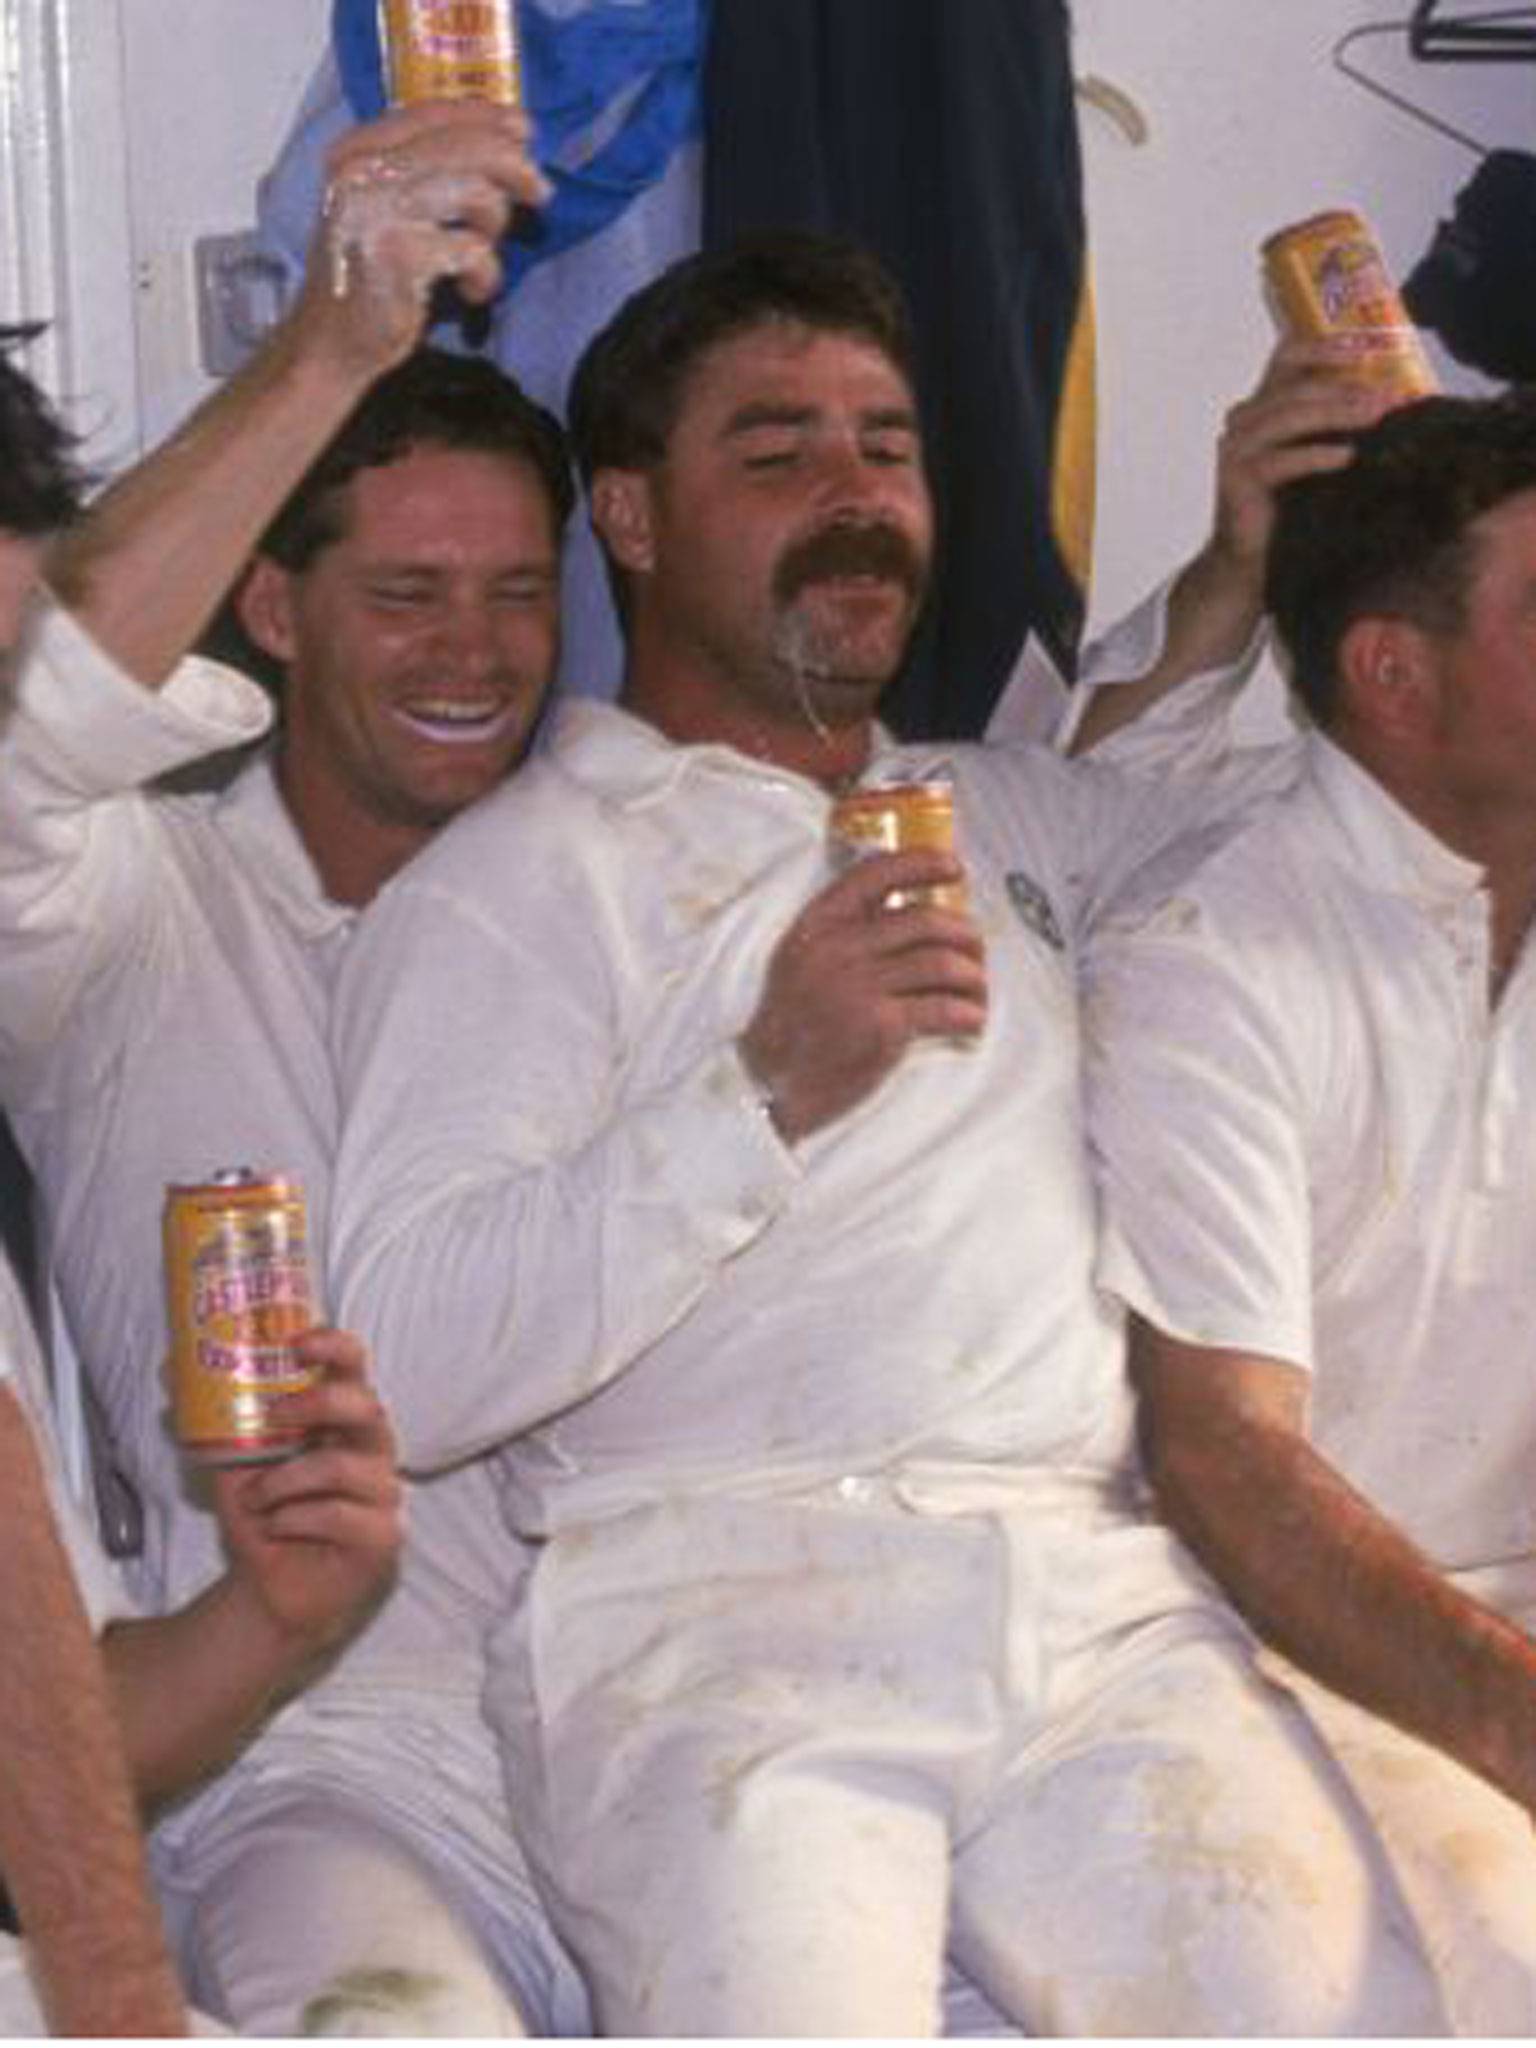 David Boon was a cricketer known to enjoy a drink...or 52